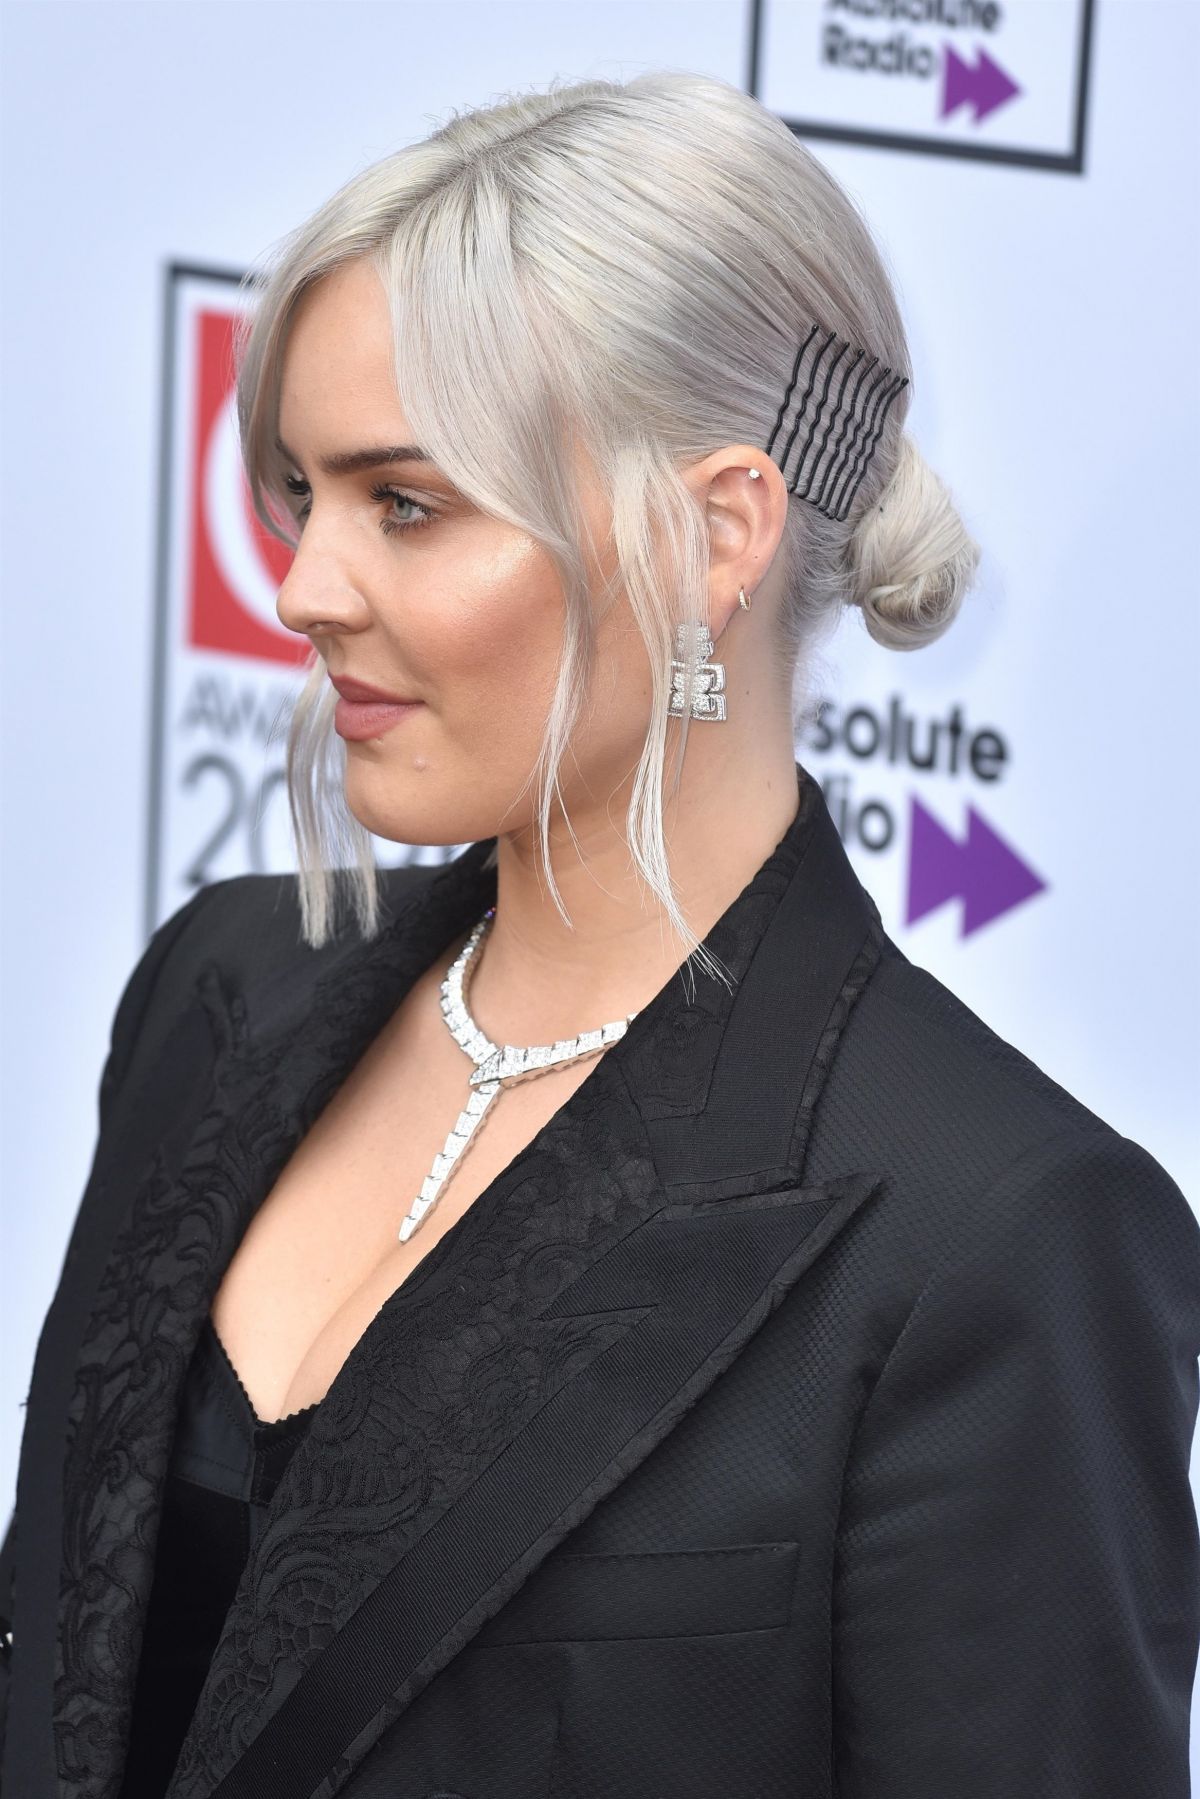 ANNE MARIE at Q Awards in London 10/16/2019 – HawtCelebs